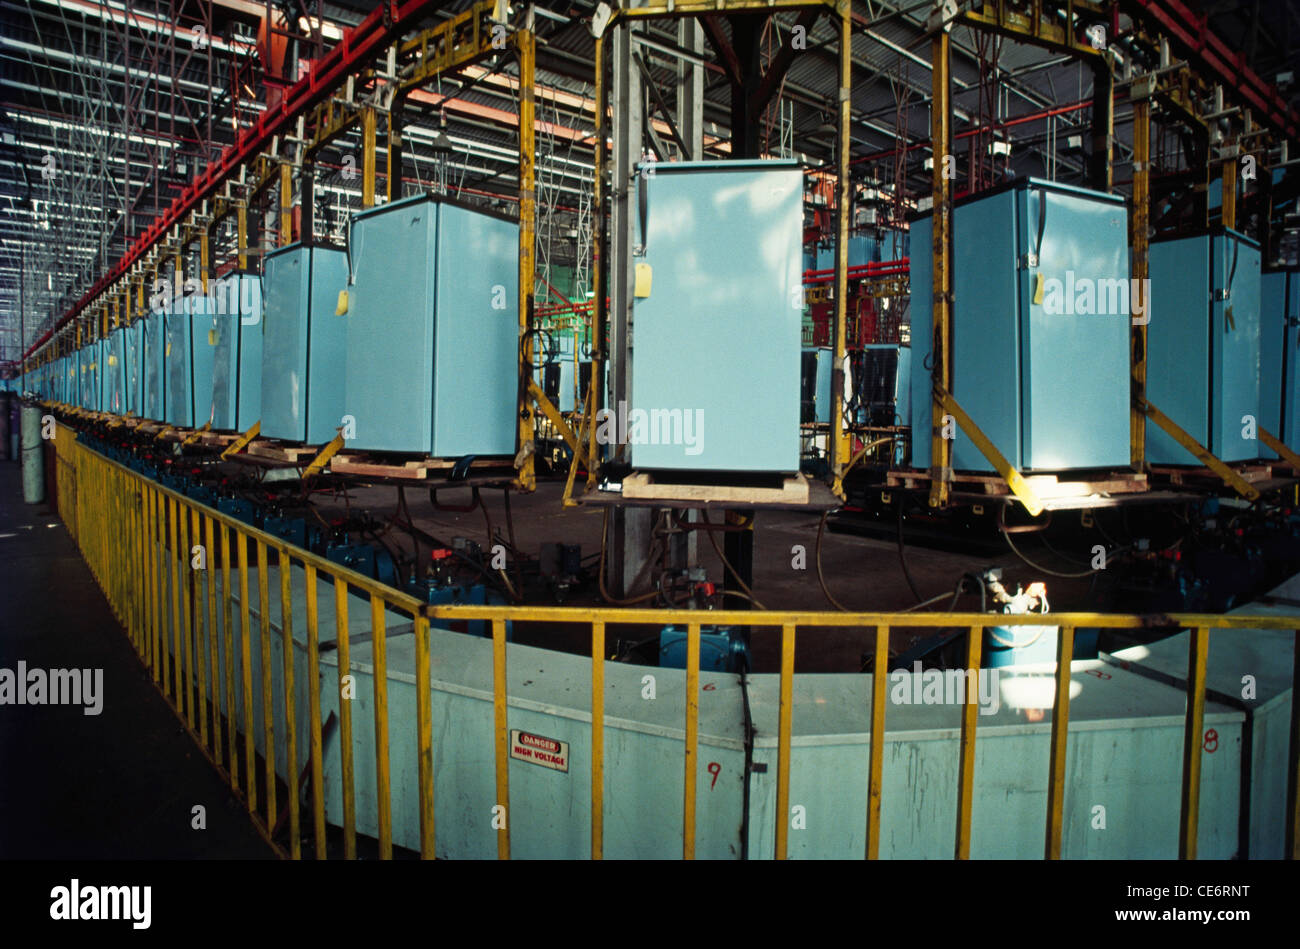 Refrigerator manufacturing moving on conveyor belt factory industry plant india Stock Photo